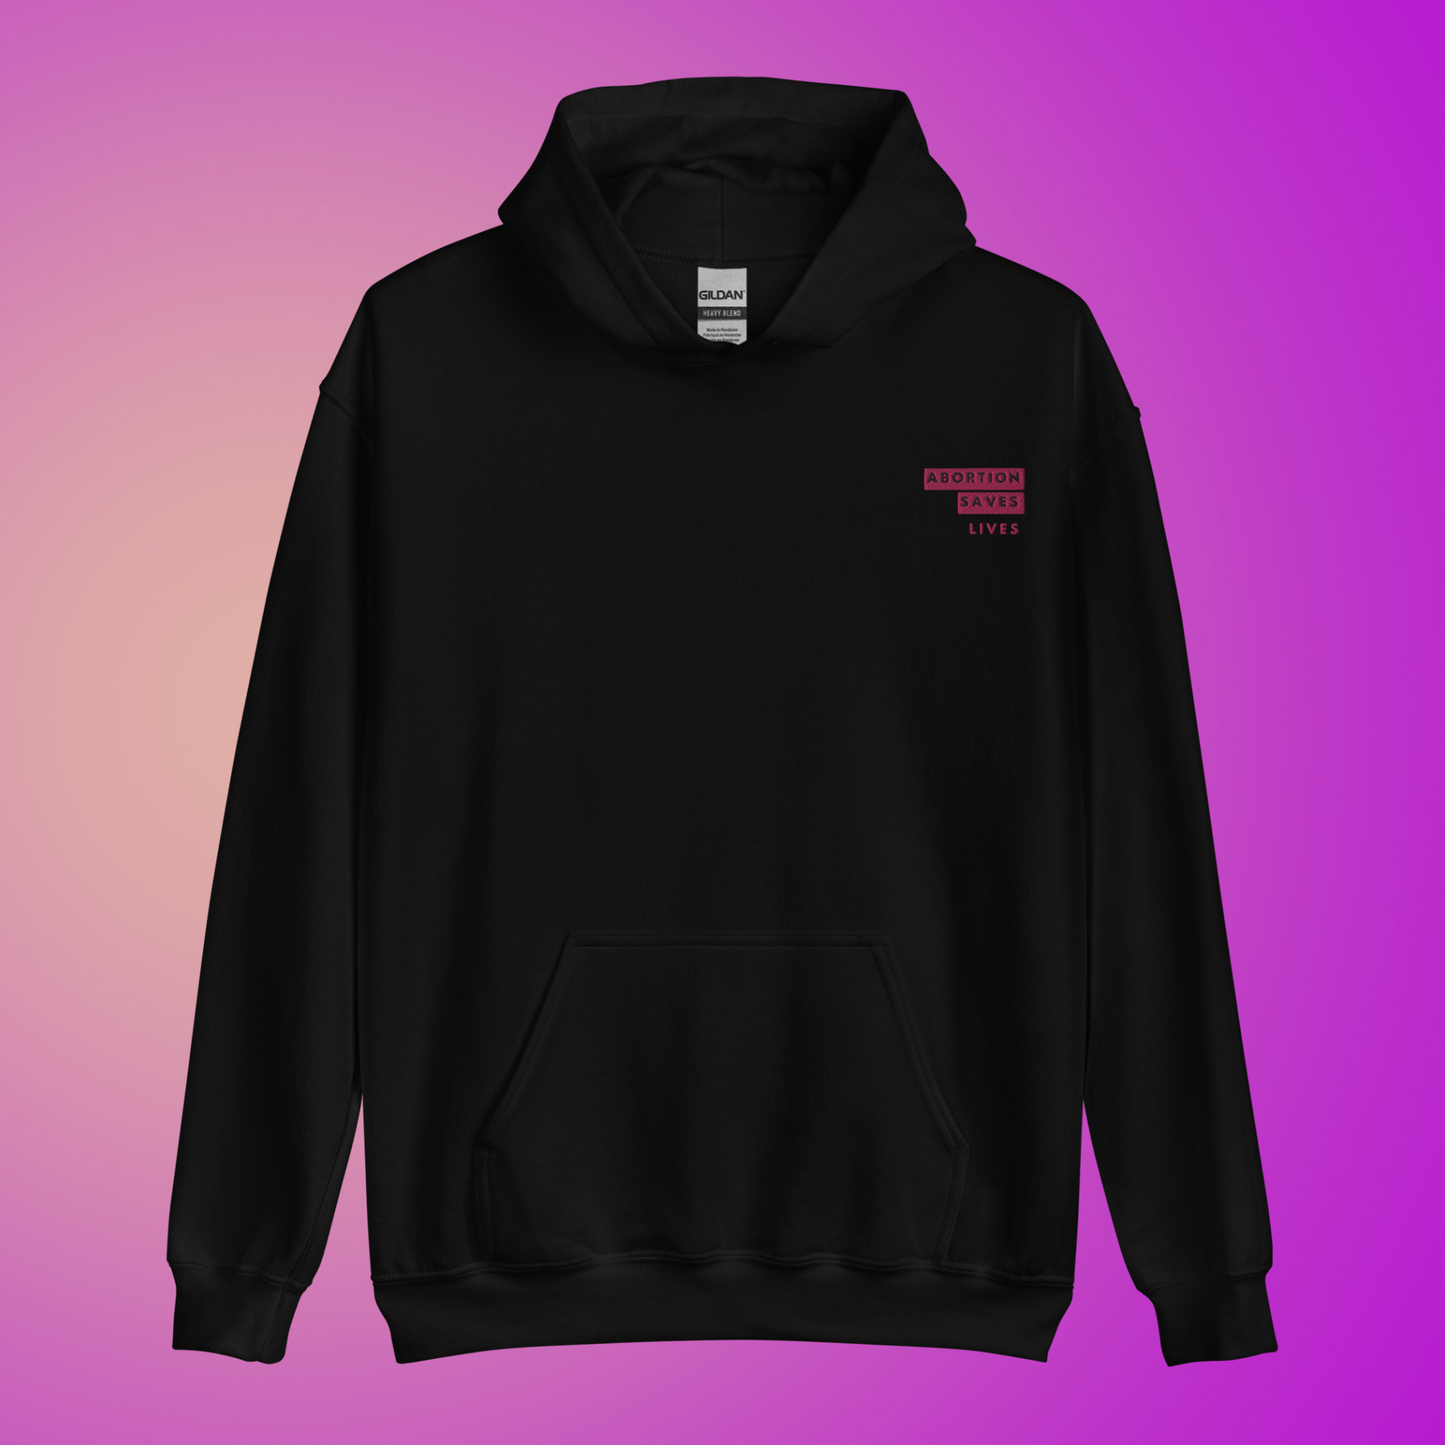 Abortion Saves Lives Unisex Embroidered Hoodie